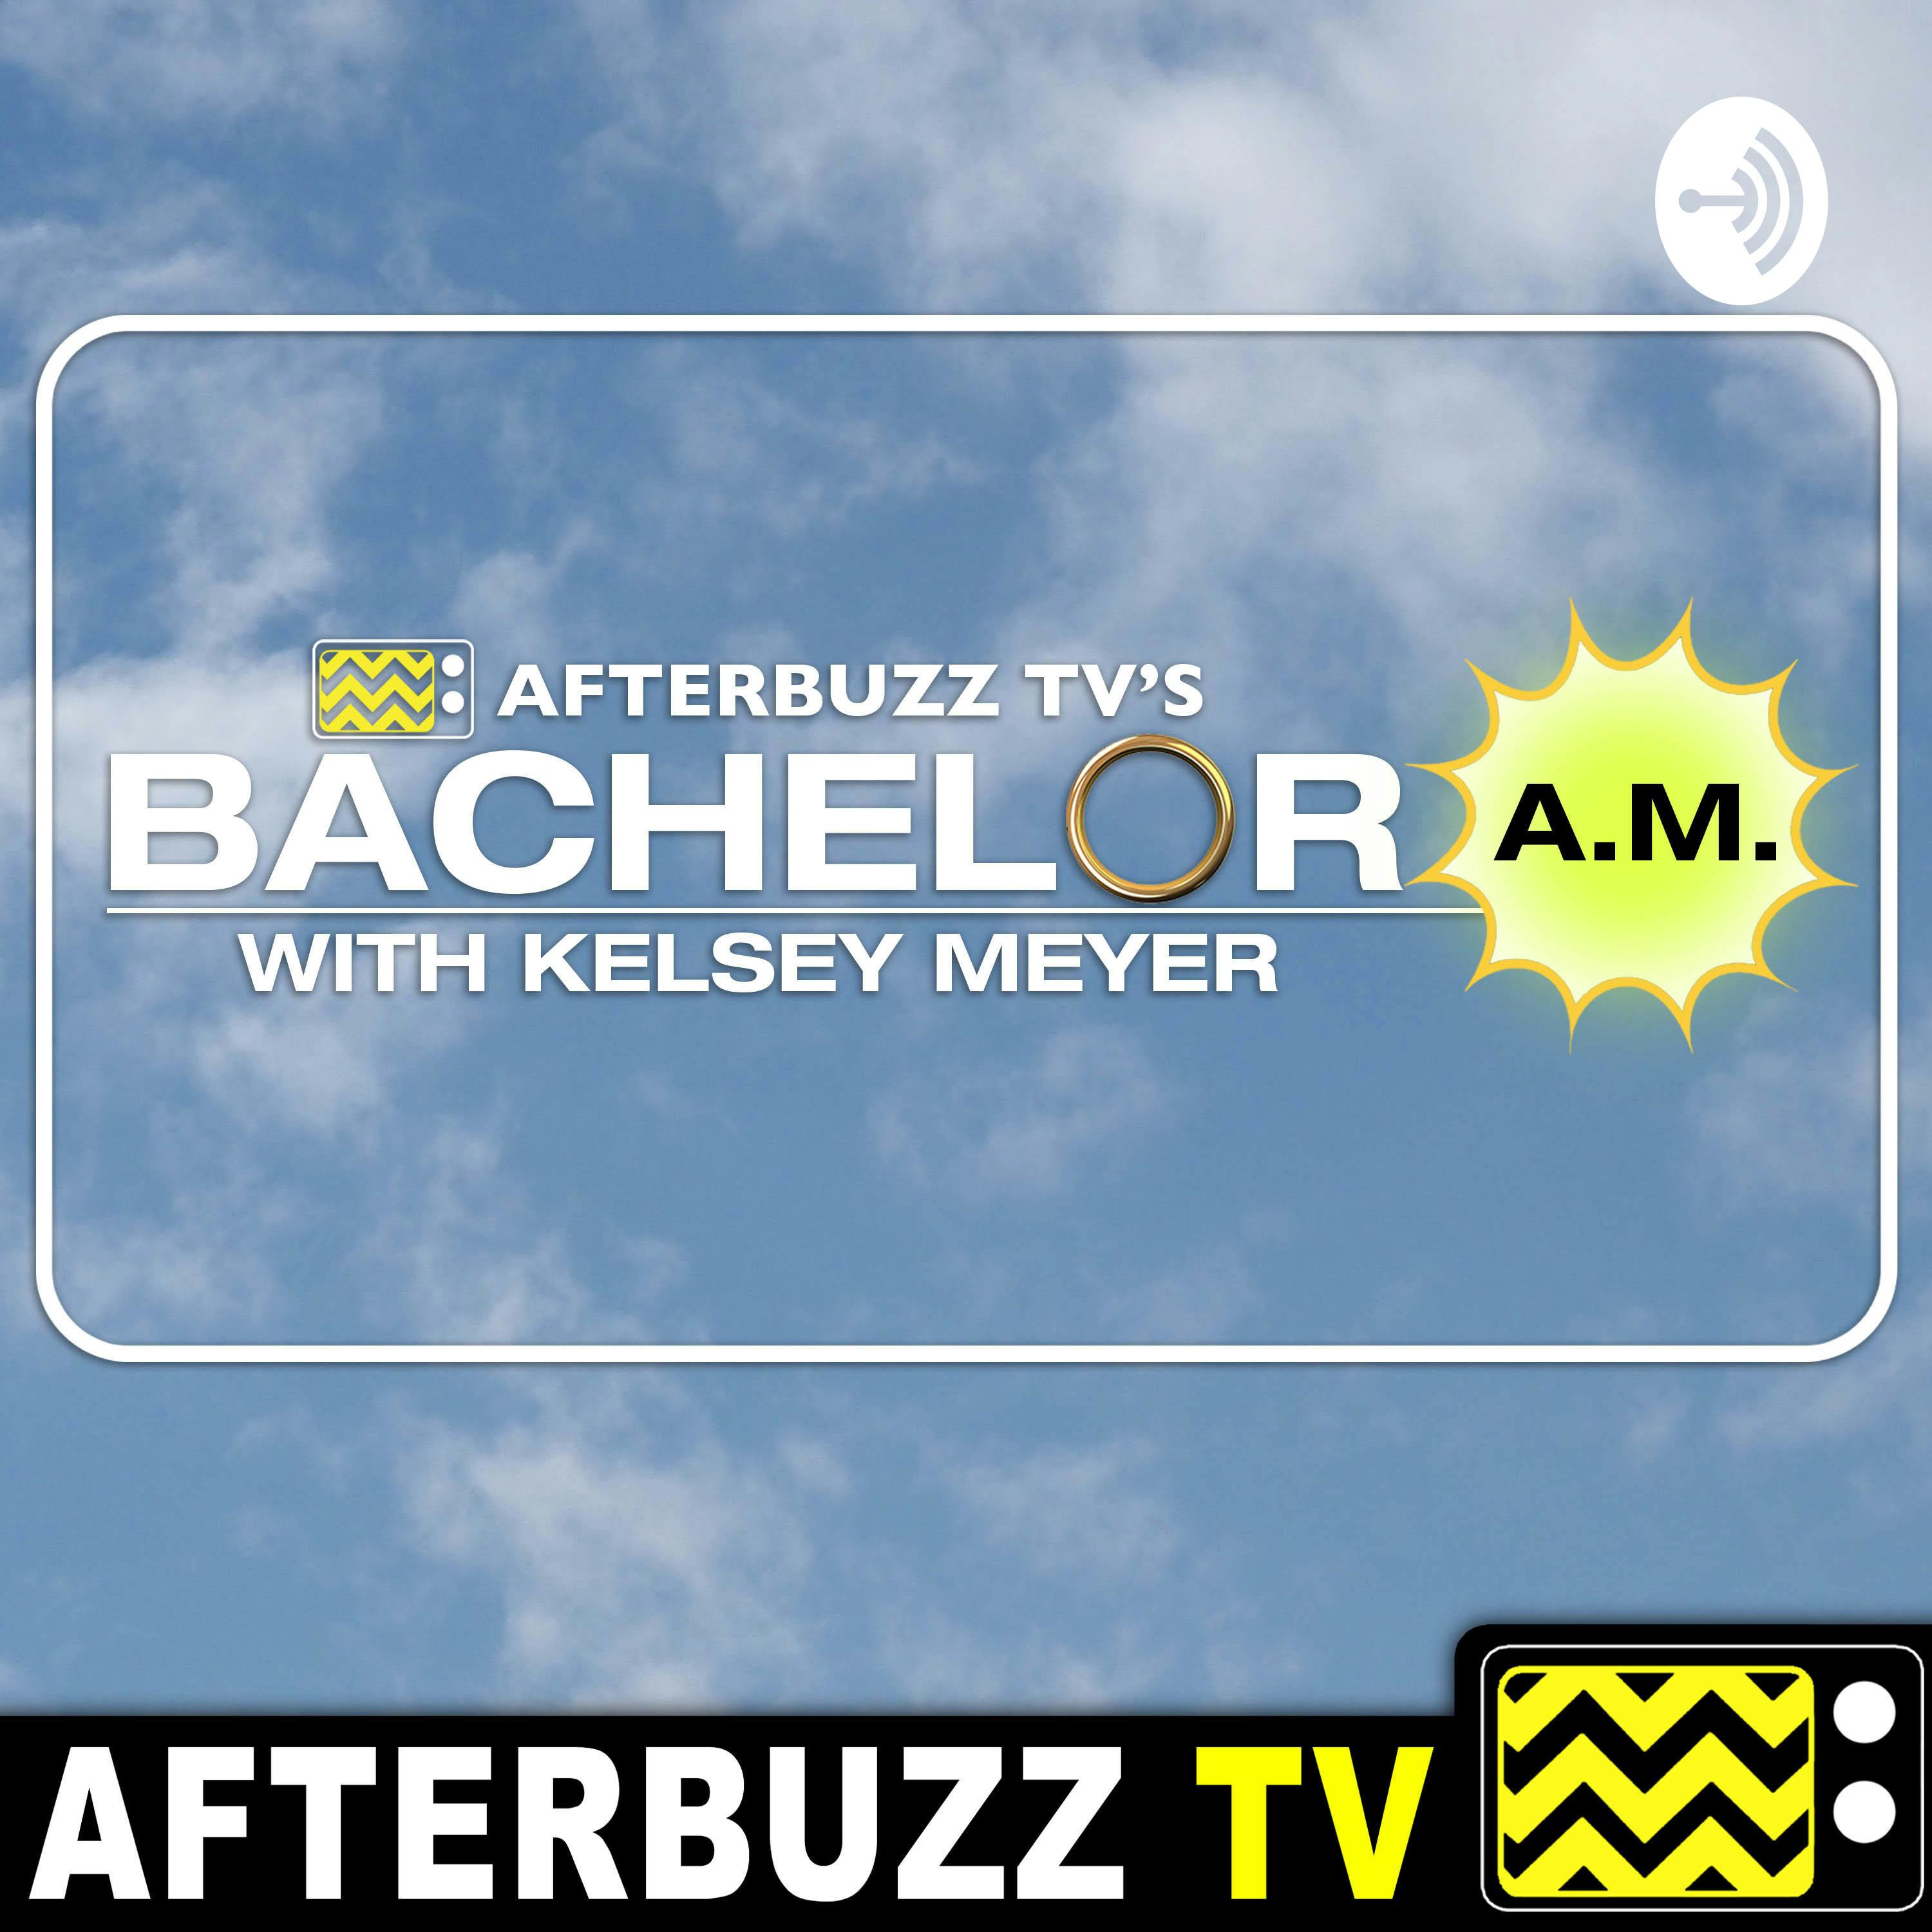 Bachelor A.M. with Kelsey Meyer